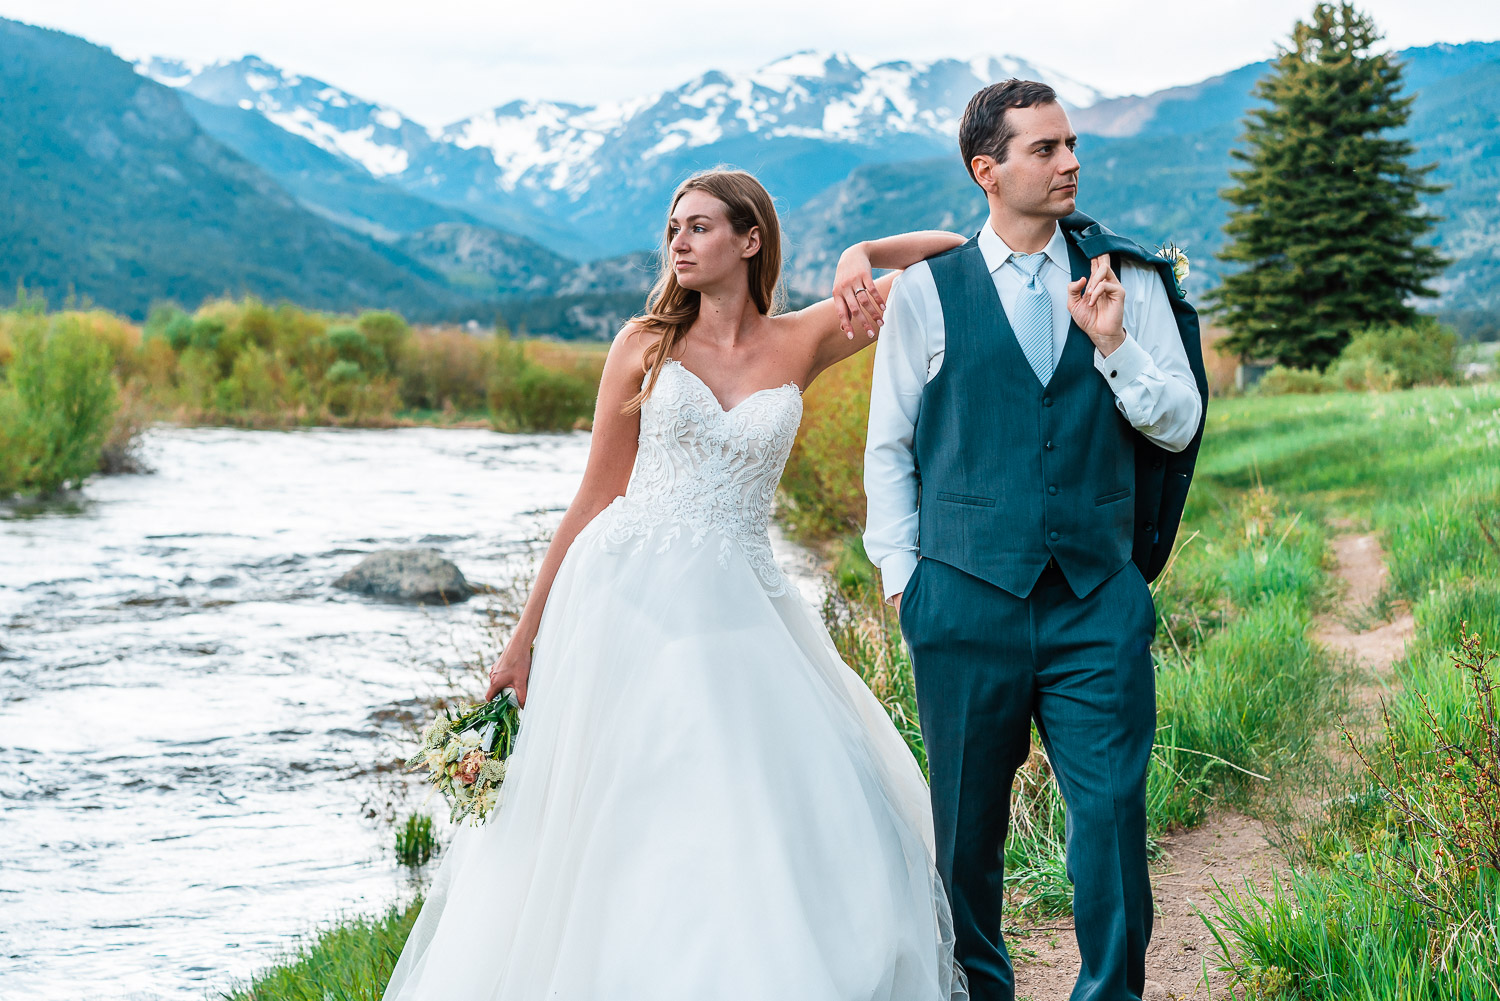 Newlyweds at Moraine Park Trail